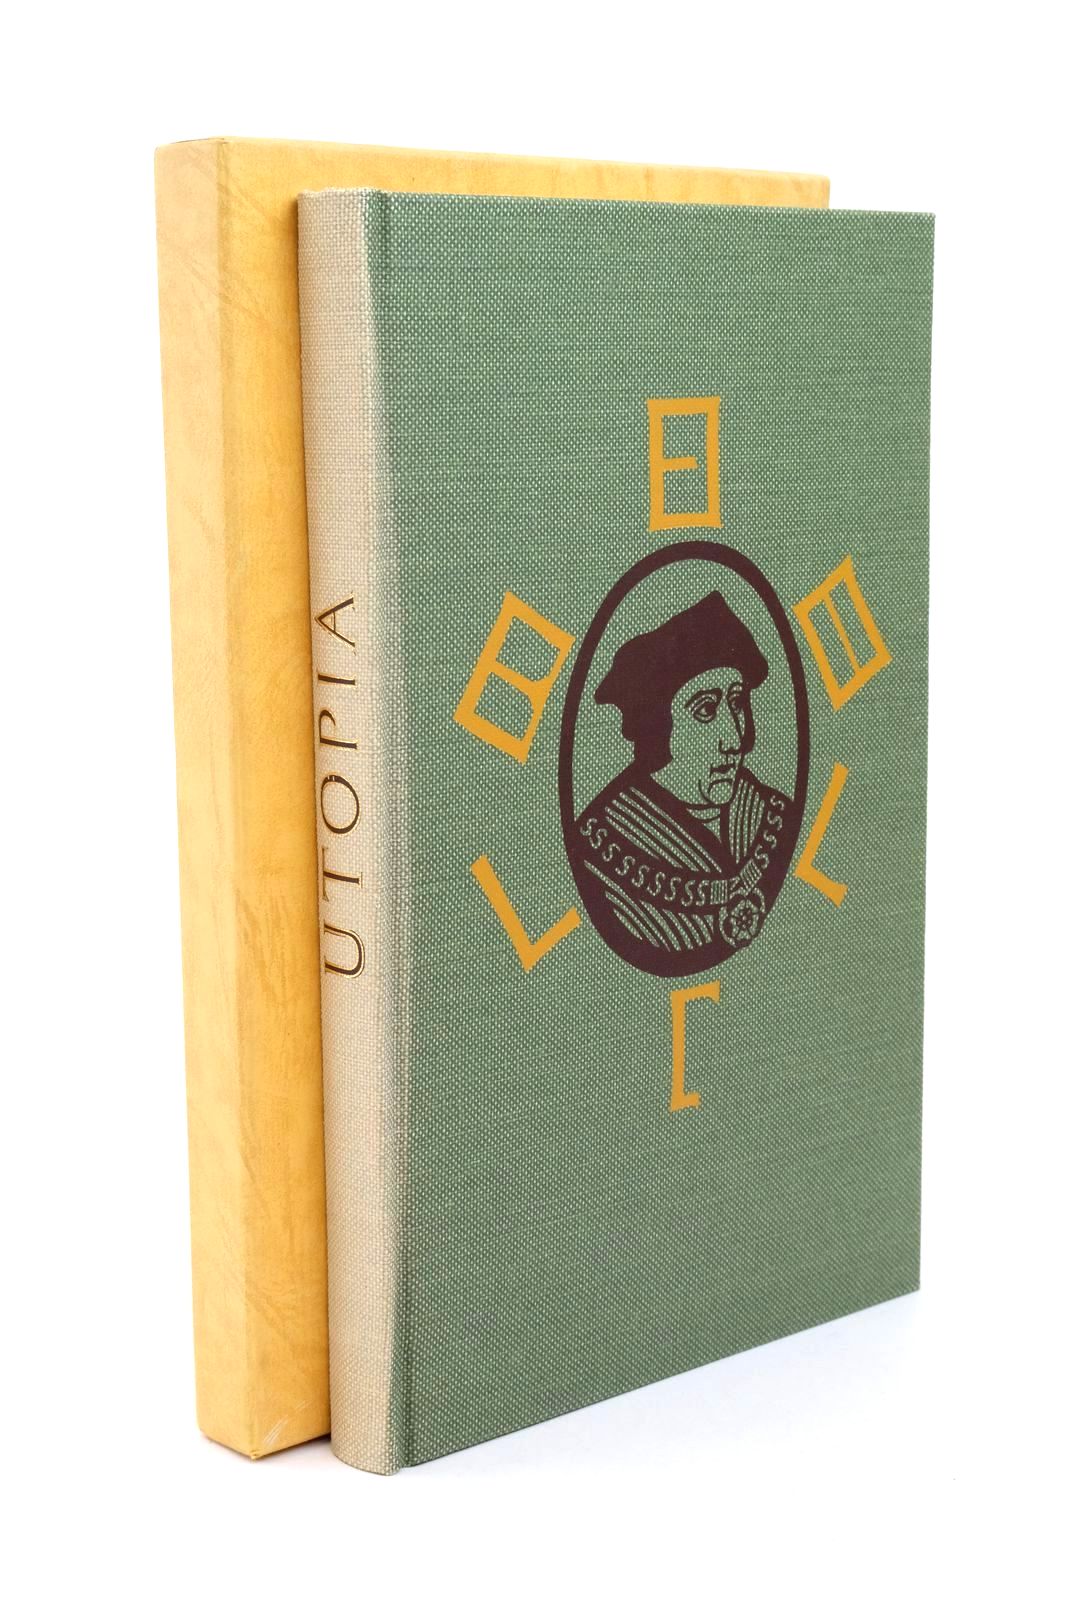 Photo of UTOPIA written by More, Thomas illustrated by Bawden, Edward published by Folio Society (STOCK CODE: 1322878)  for sale by Stella & Rose's Books